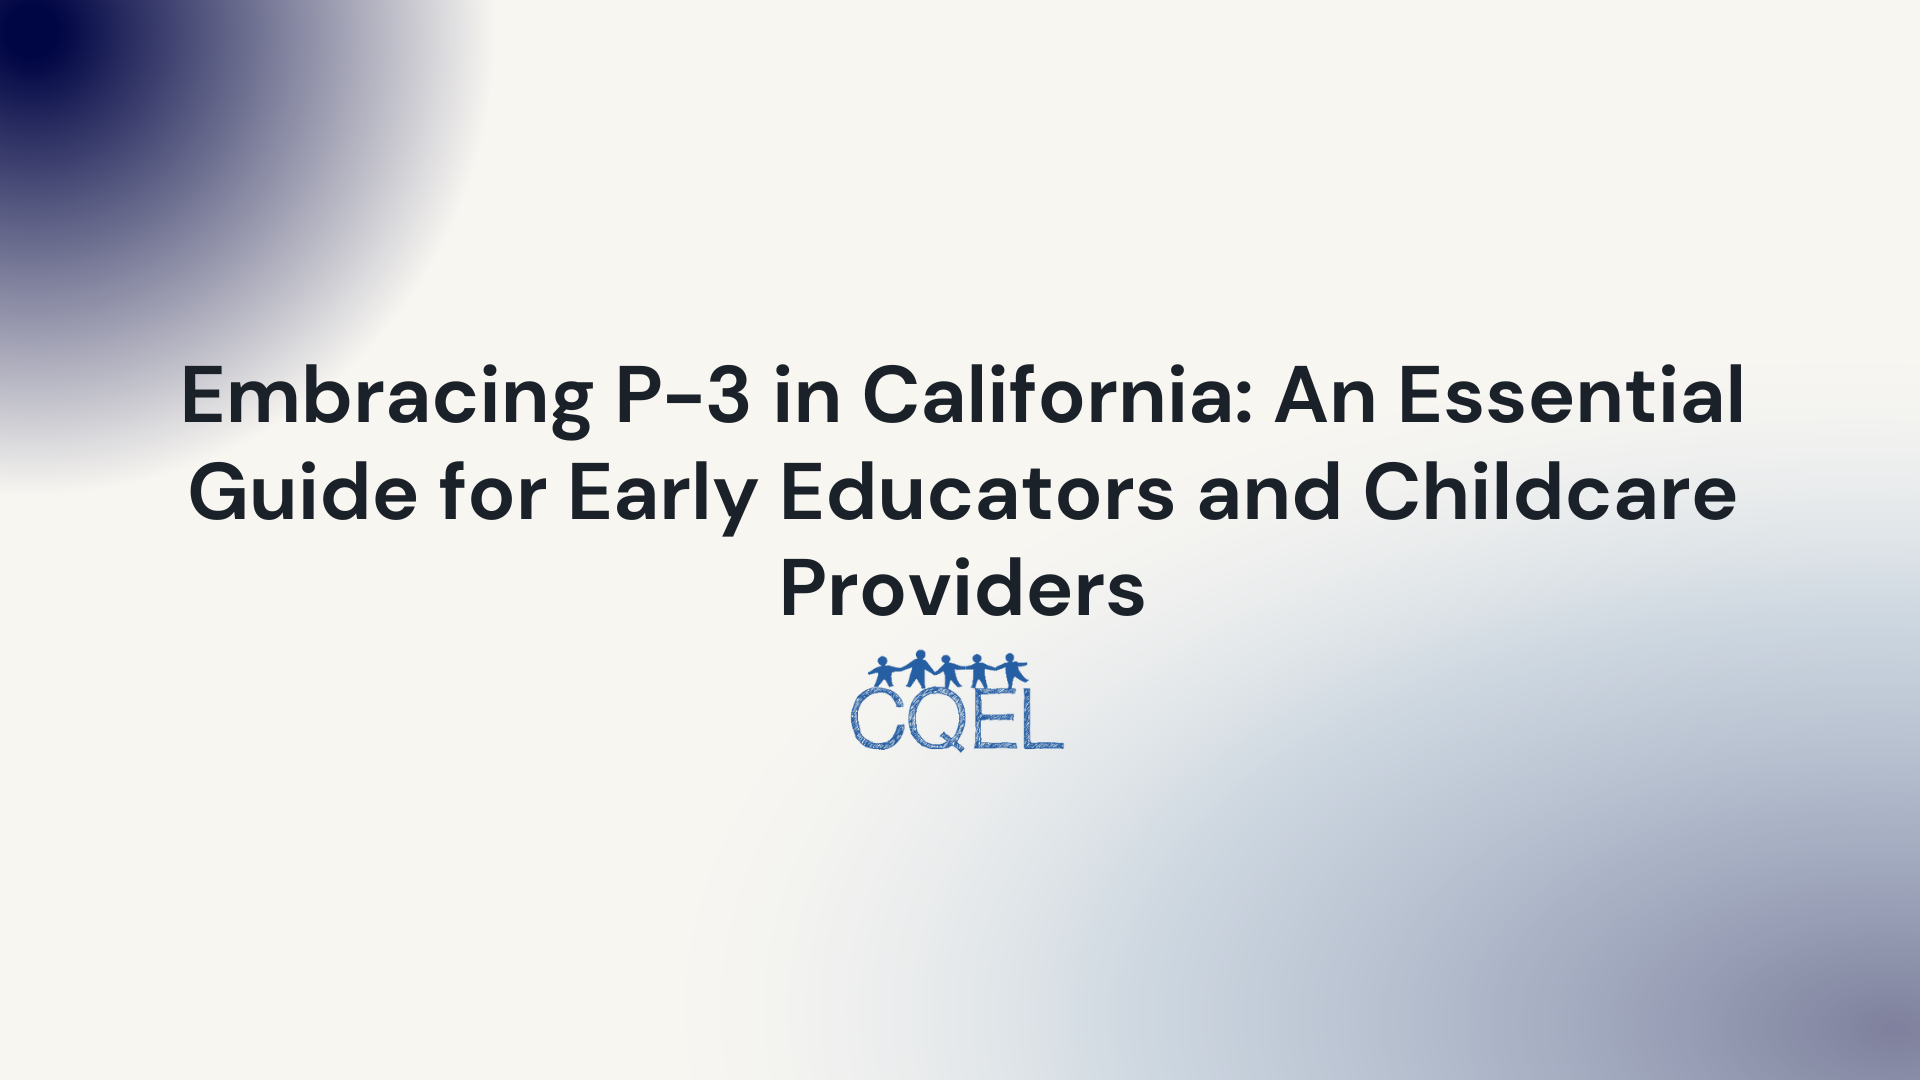 Embracing P-3 in California: An Essential Guide for Early Educators and Childcare Providers